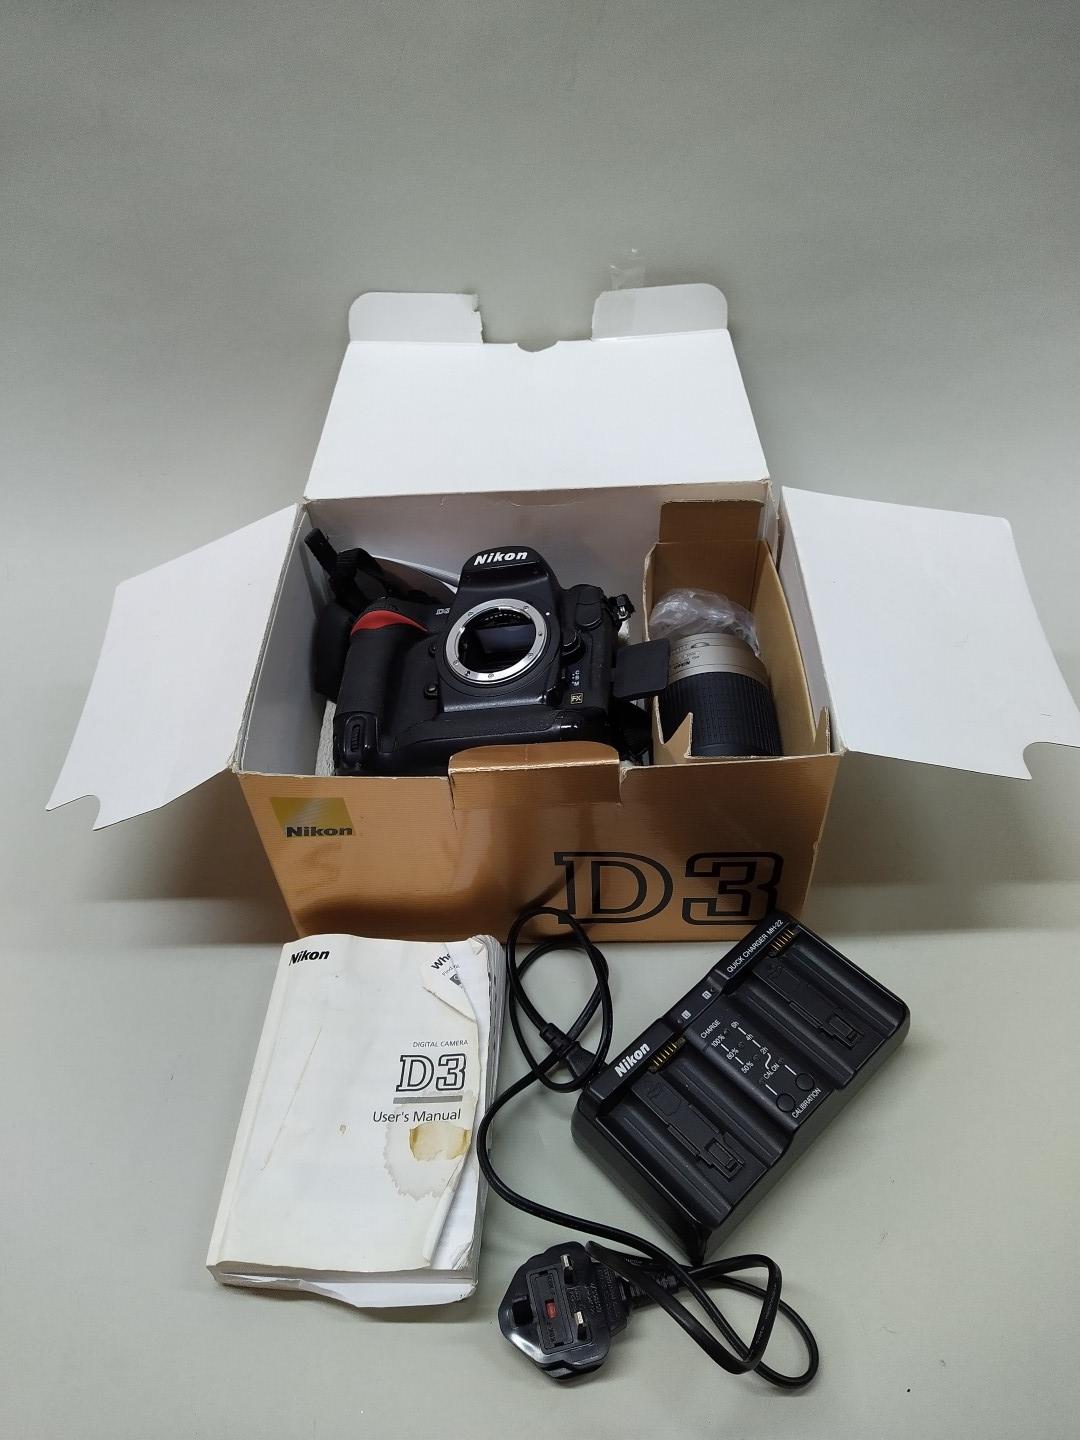 A Nikon D3 camera body with a Nikon 70-300mm lens and charger (as found) in original box